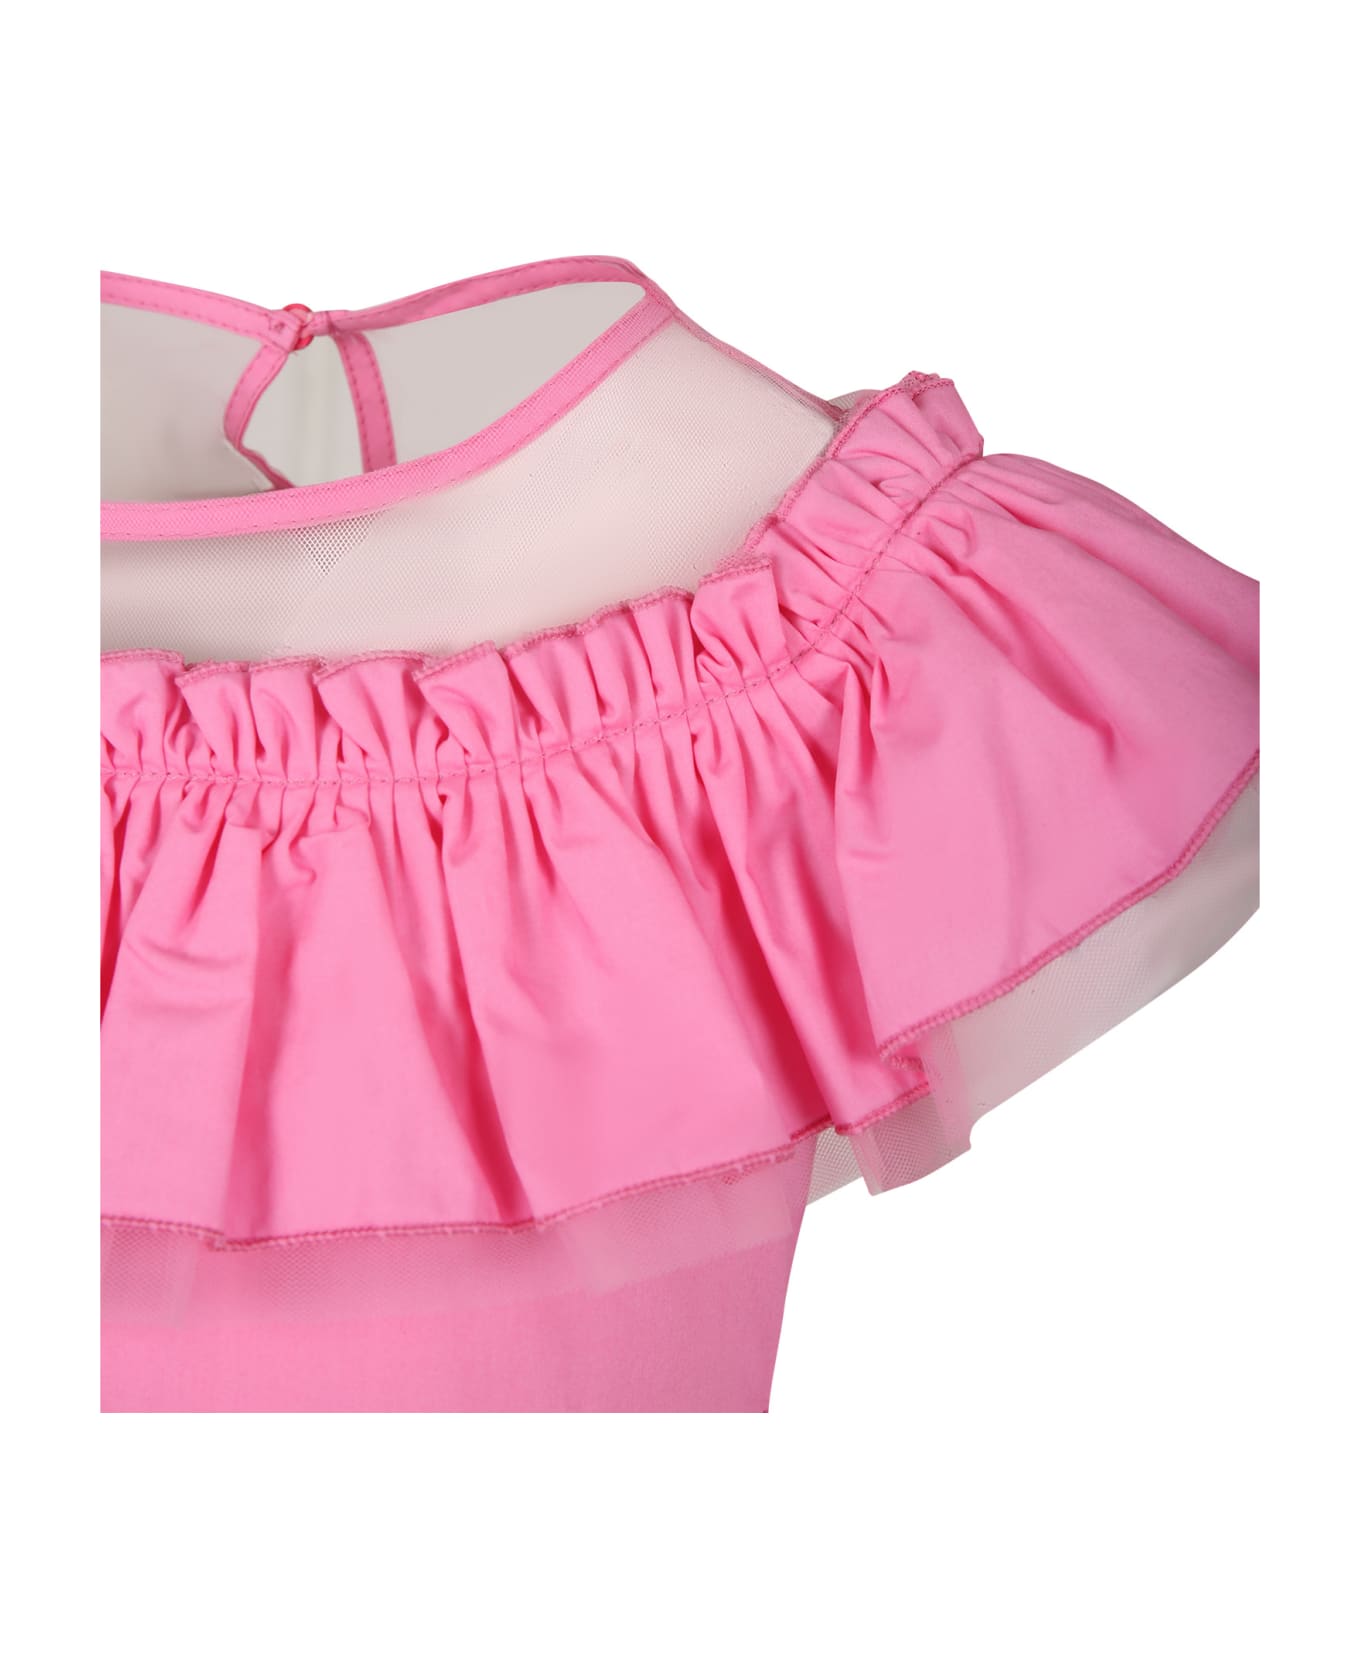 Monnalisa Pink Dress For Girl With Tulle And Ruffles - Pink ワンピース＆ドレス